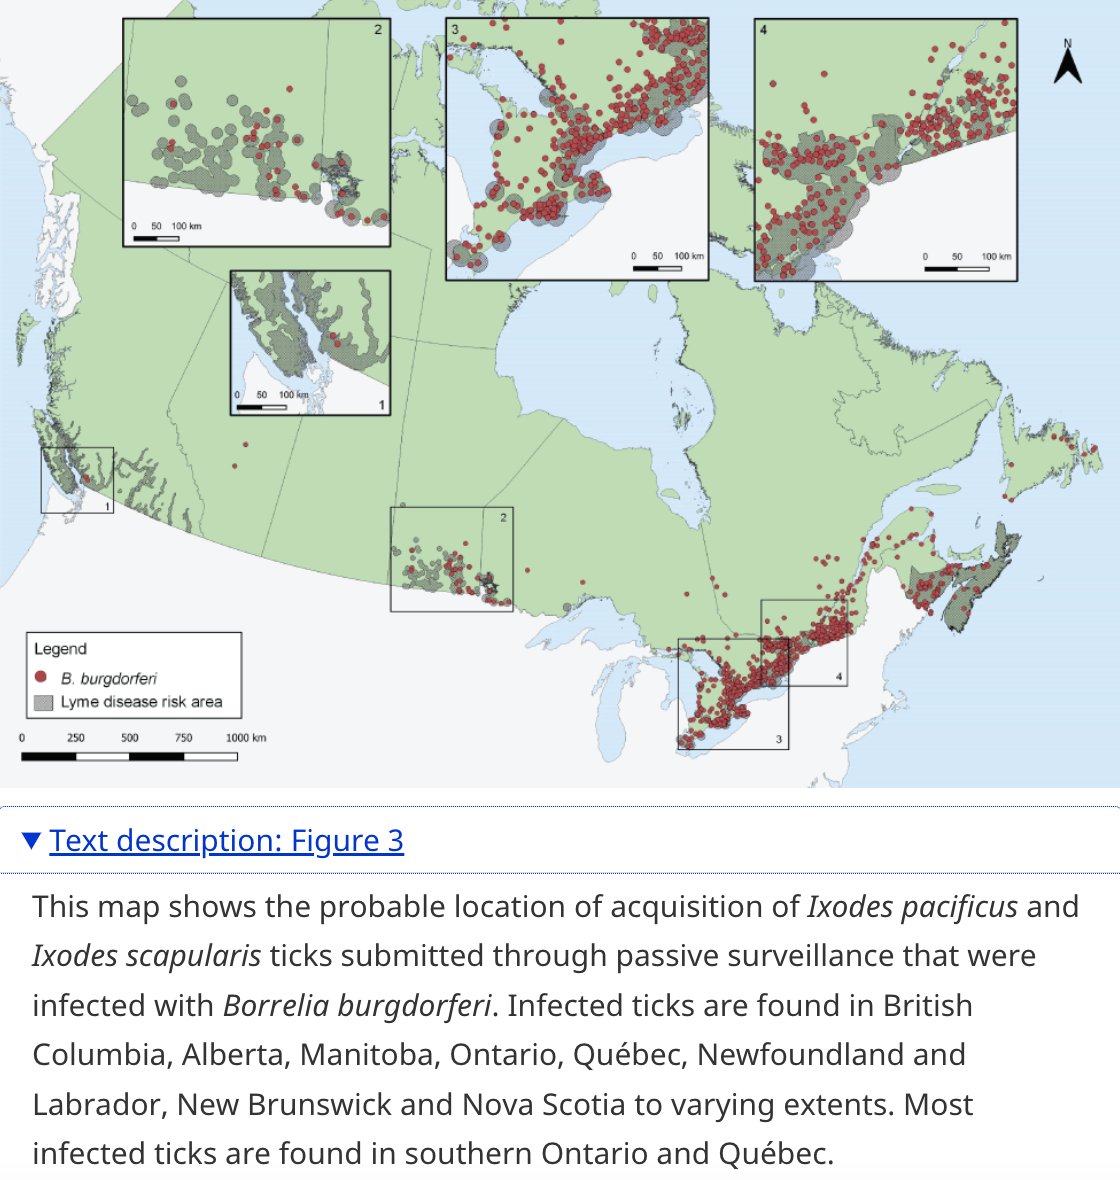 Tick-borne infections are a growing issue in Canada. 1. ~20% of ticks have evidence of Borrelia burgdorferi (causes Lyme disease). 2. Much less common but still here: Anaplasmosis, Babesiosis, other Borrelia spp, & Powassan virus. 🇨🇦 bit.ly/3bNb4Pz by C Wilson et al.